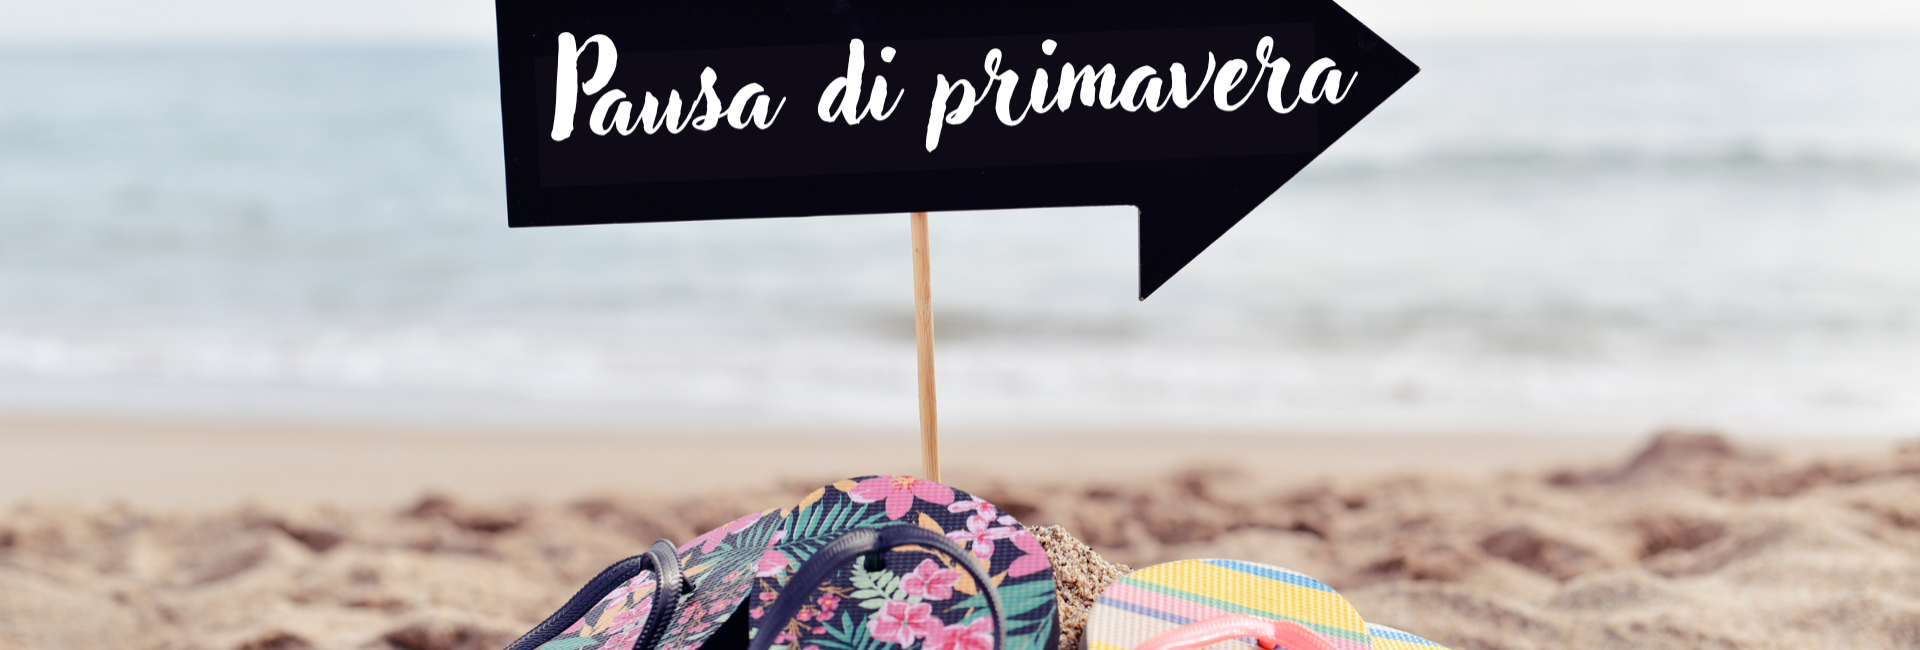 April 25 and May 1 offer in Rimini